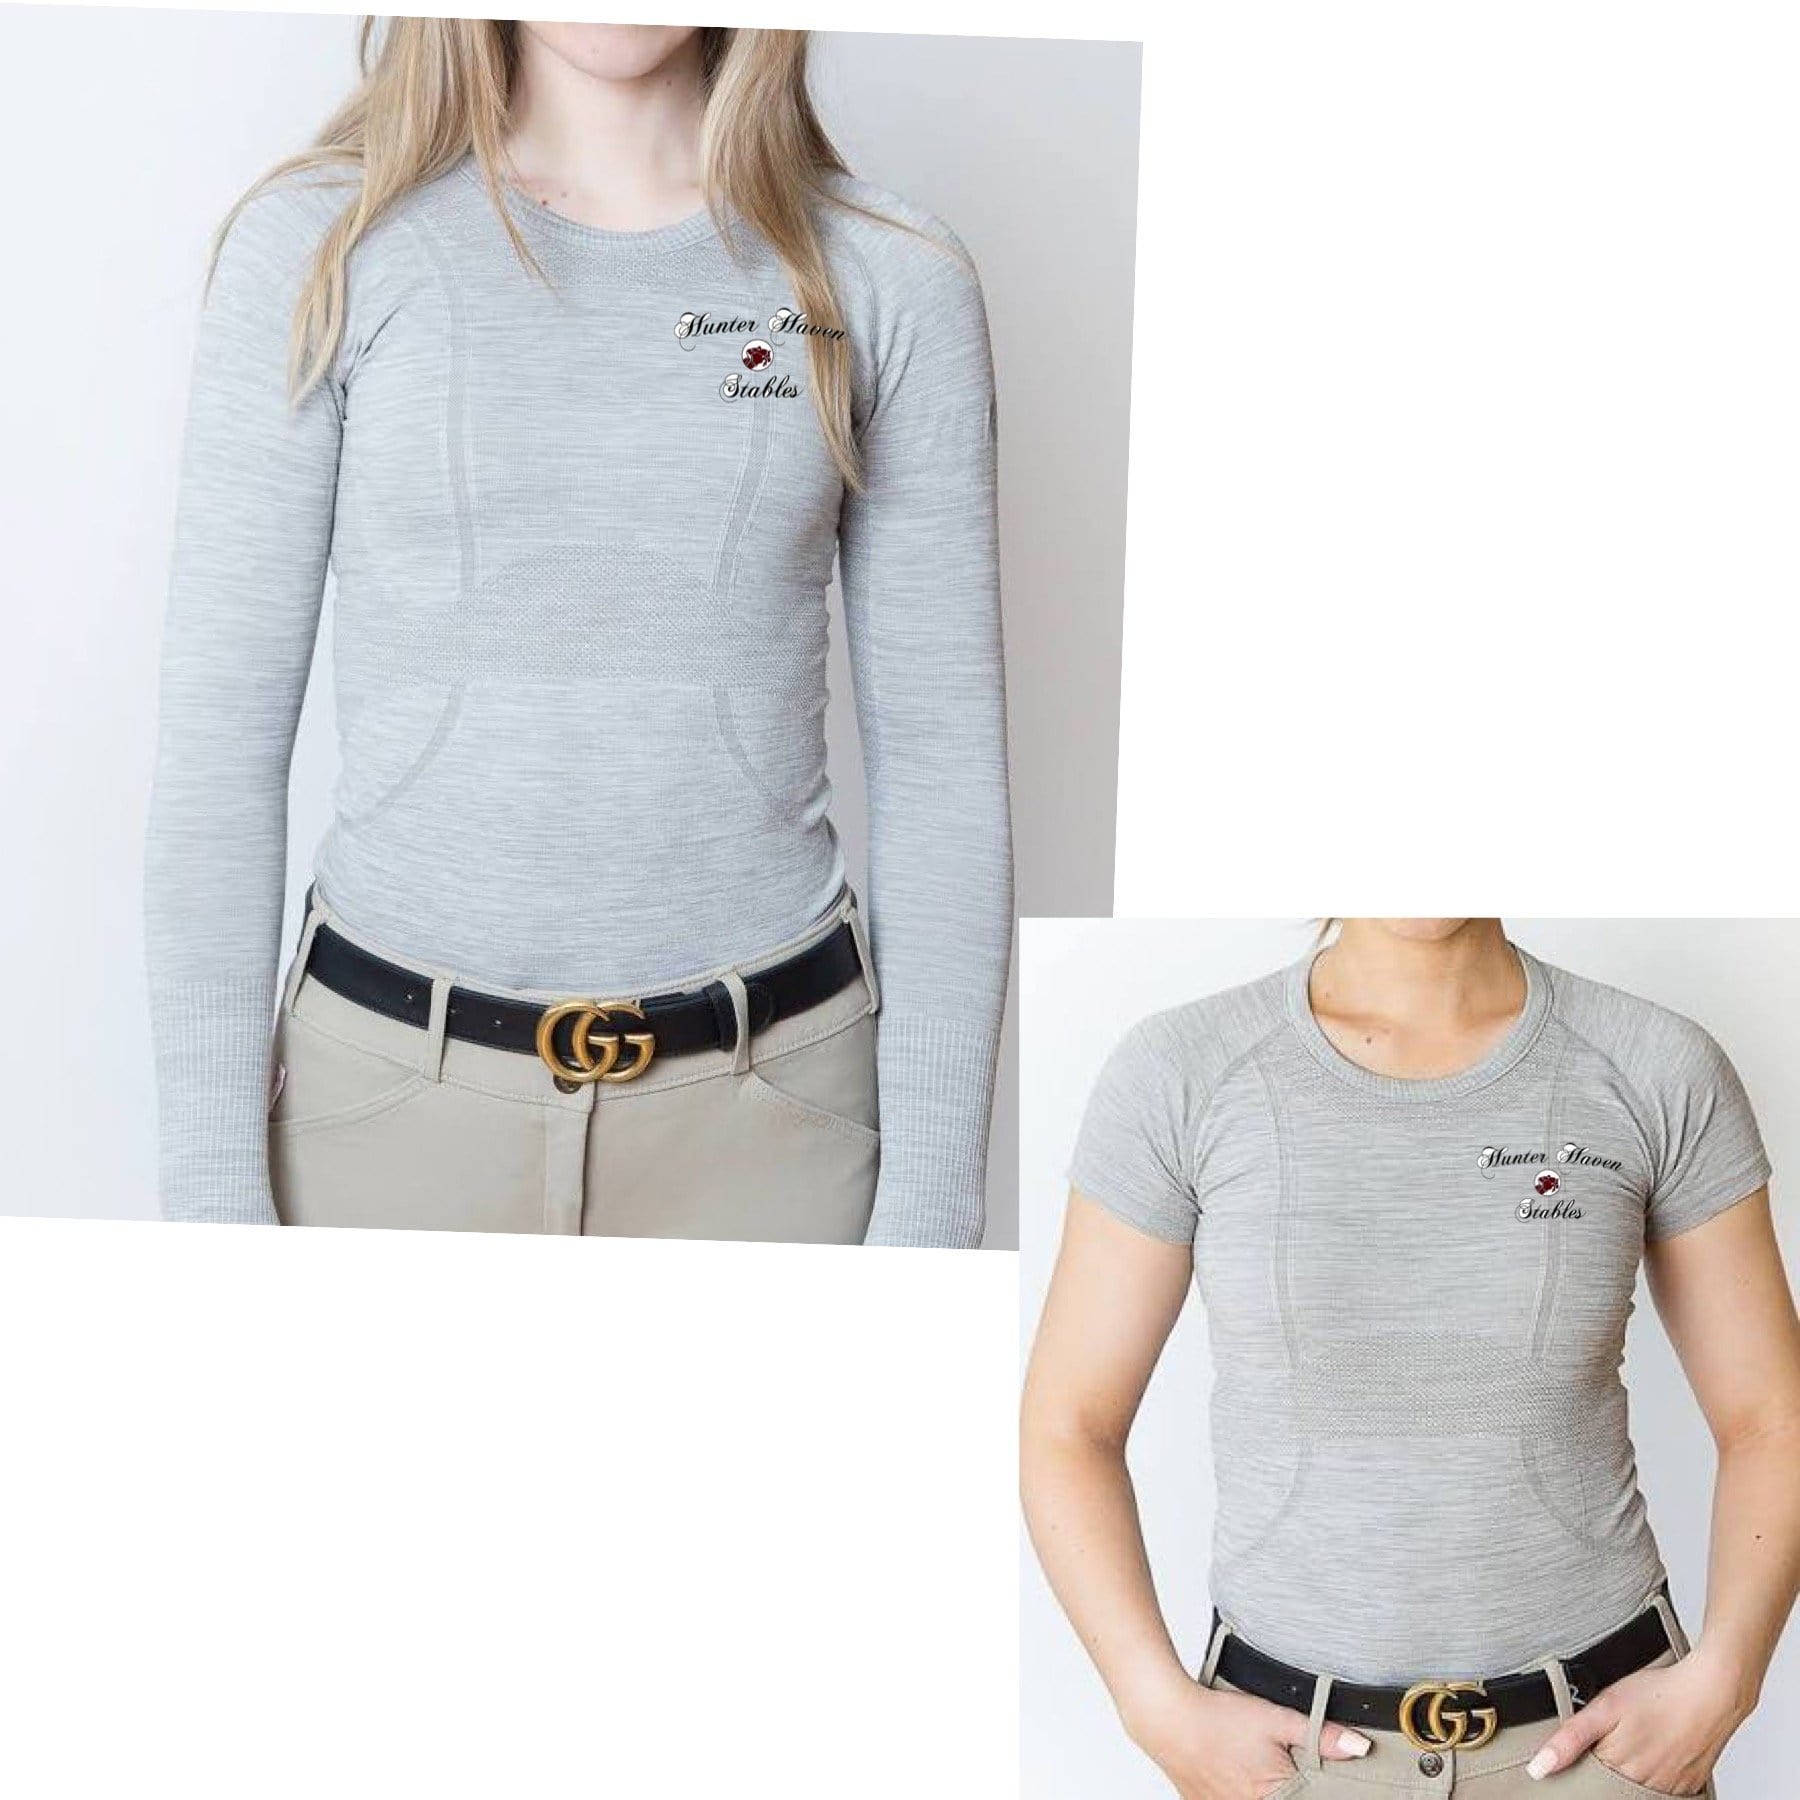 Equestrian Team Apparel Hunter Haven Stables Tech Shirt equestrian team apparel online tack store mobile tack store custom farm apparel custom show stable clothing equestrian lifestyle horse show clothing riding clothes horses equestrian tack store